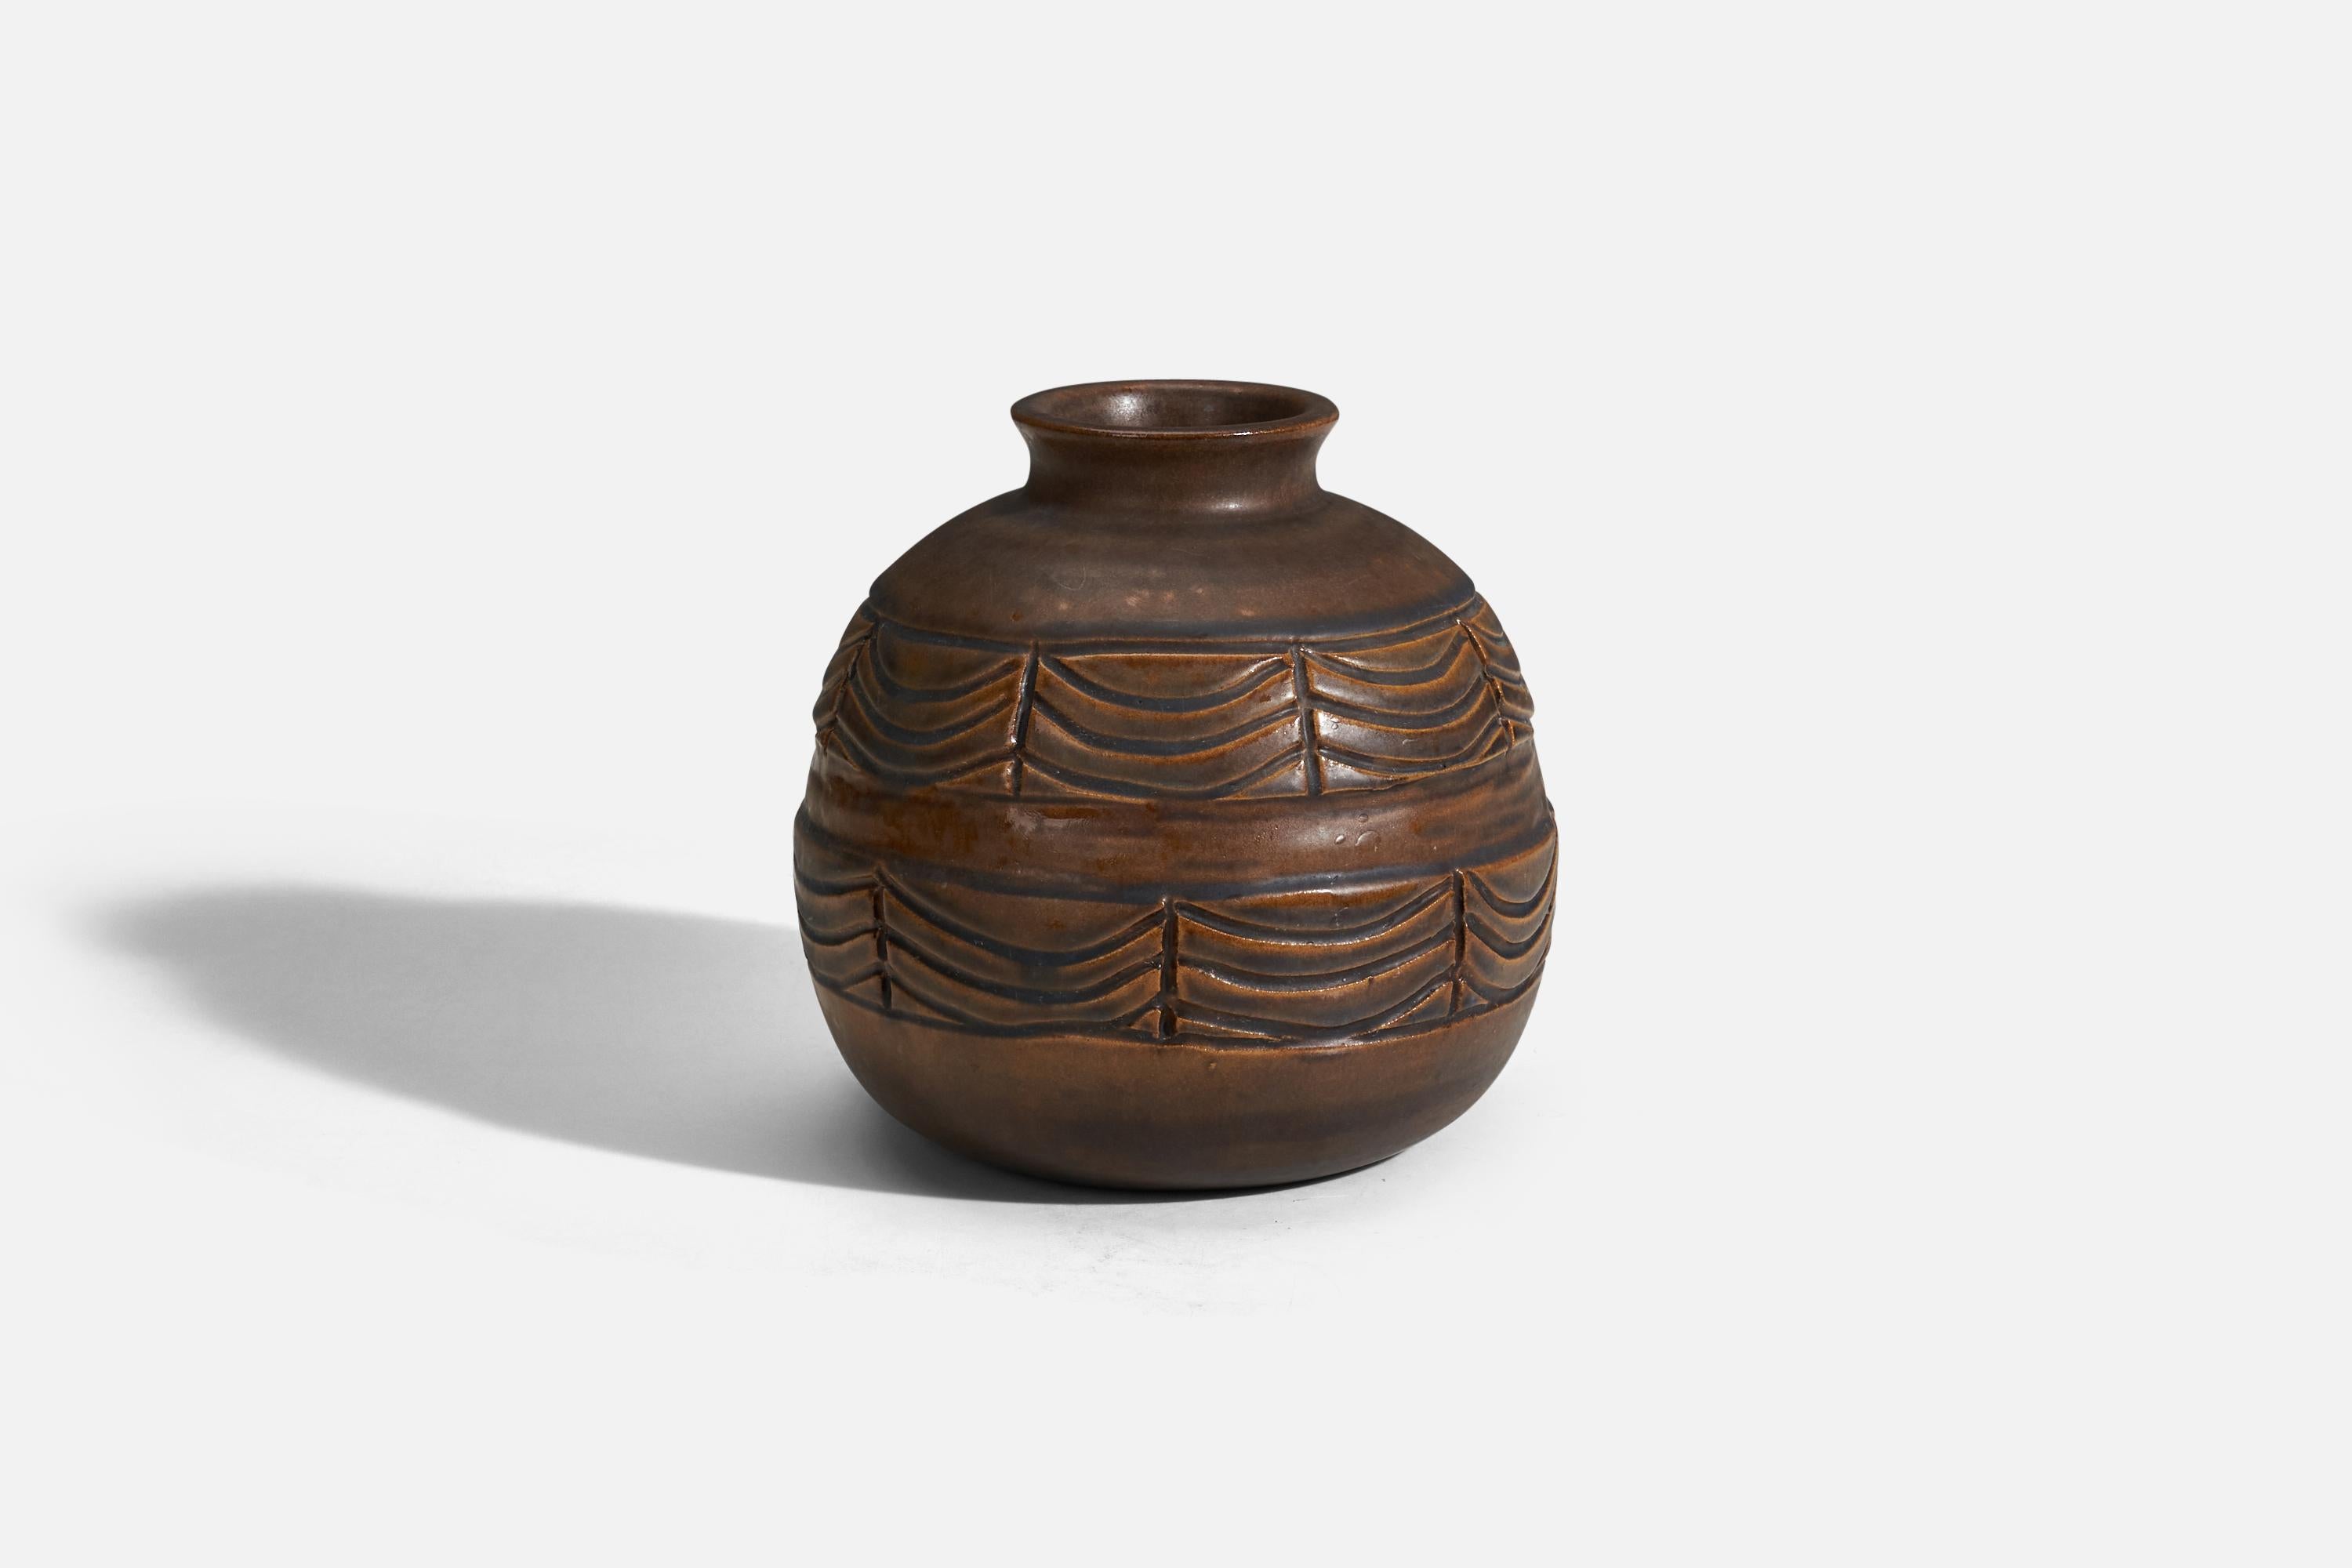 A brown glazed stoneware vase designed and produced in Sweden, 1960s.